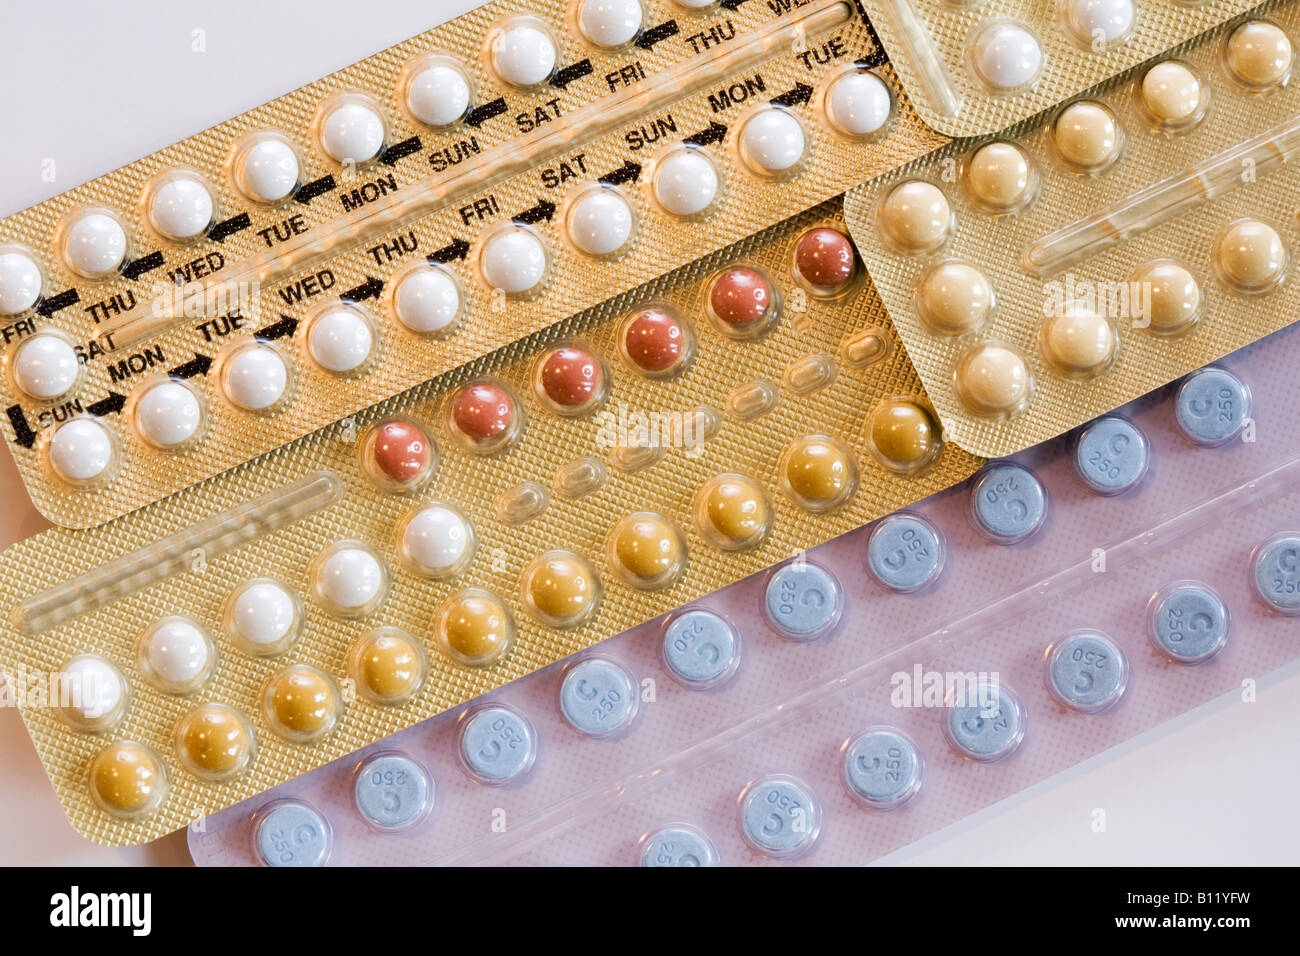 A selection of contraceptive pills for female contraception, UK Stock Photo